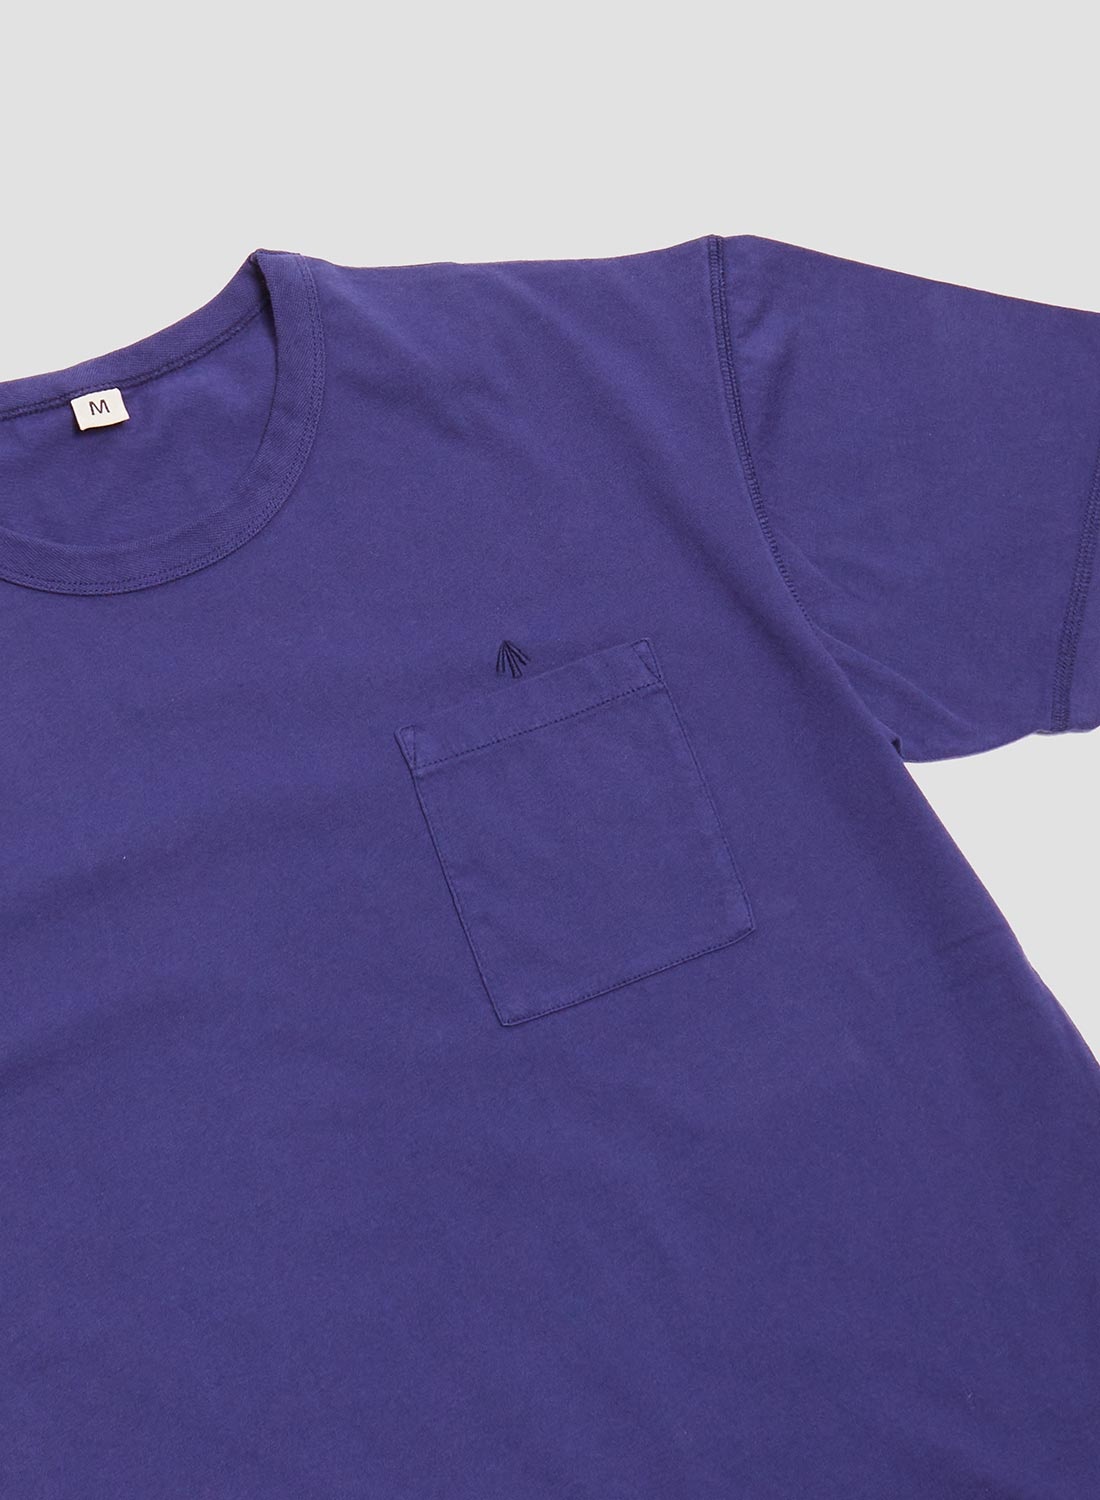 Classic Pocket Tee in Royal Blue - 2